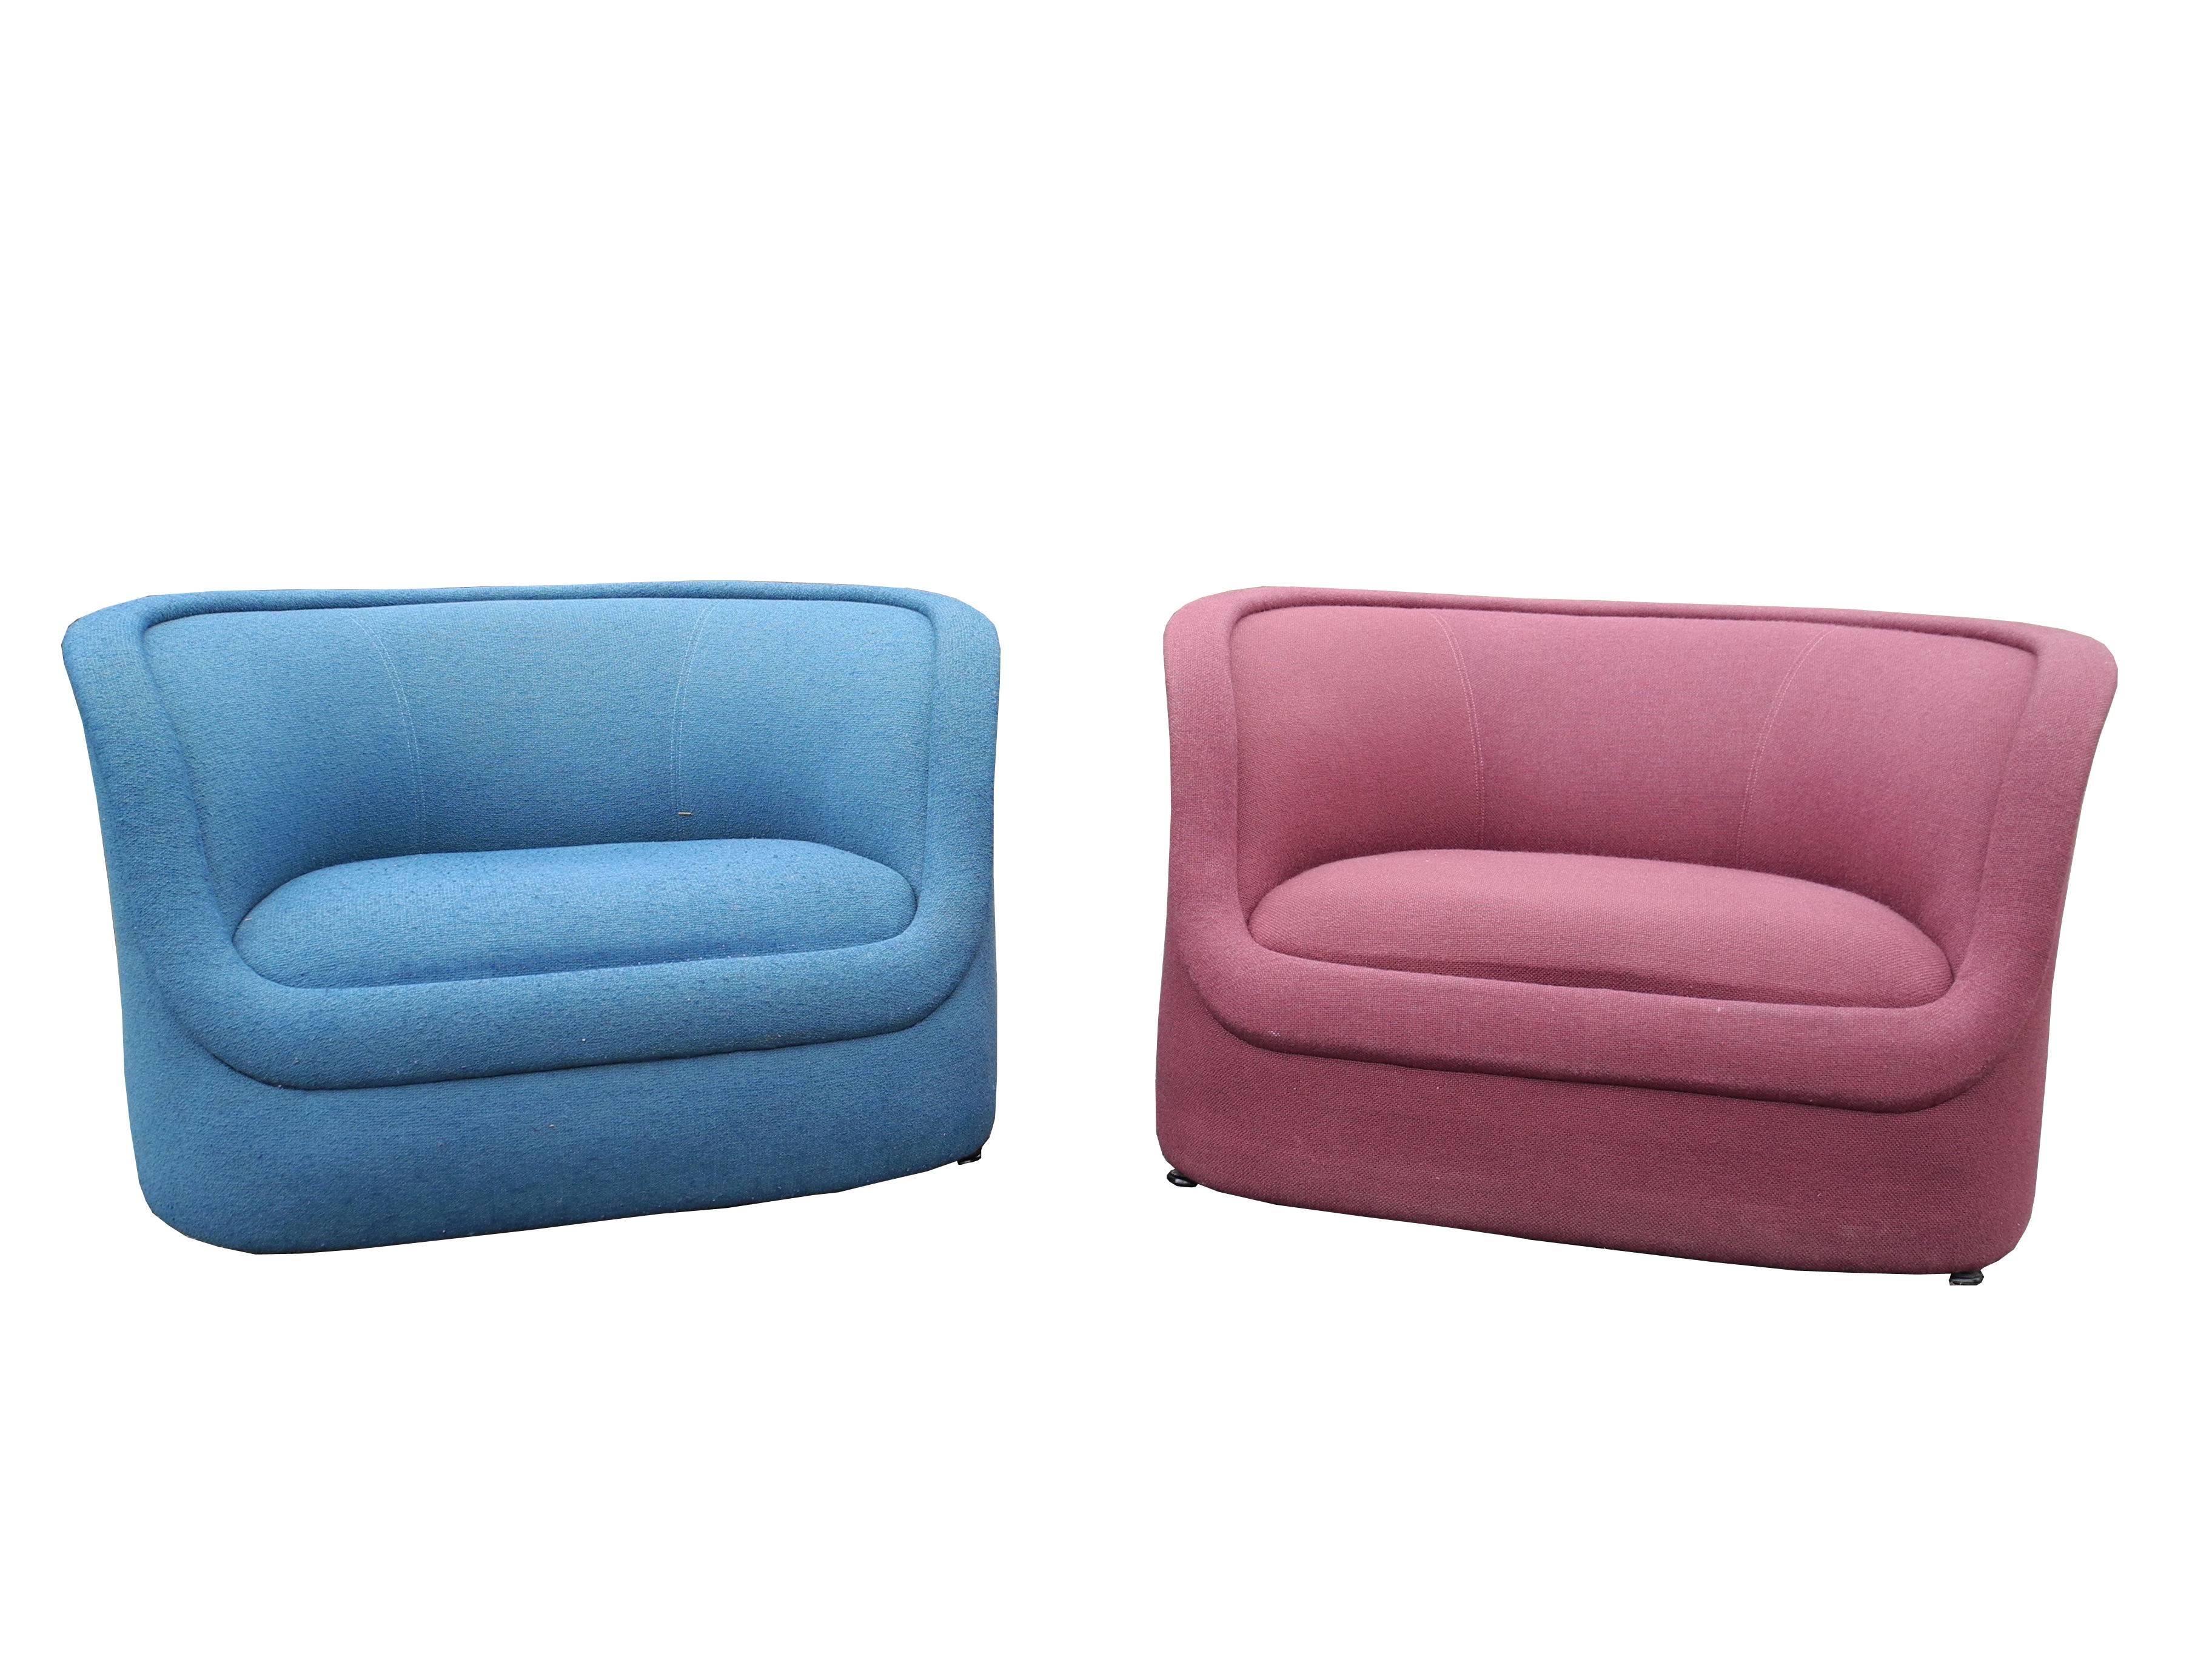 20th Century Pair of Modern Biomorphic Lounge Chairs by Ward Bennett for Brickel Associates For Sale